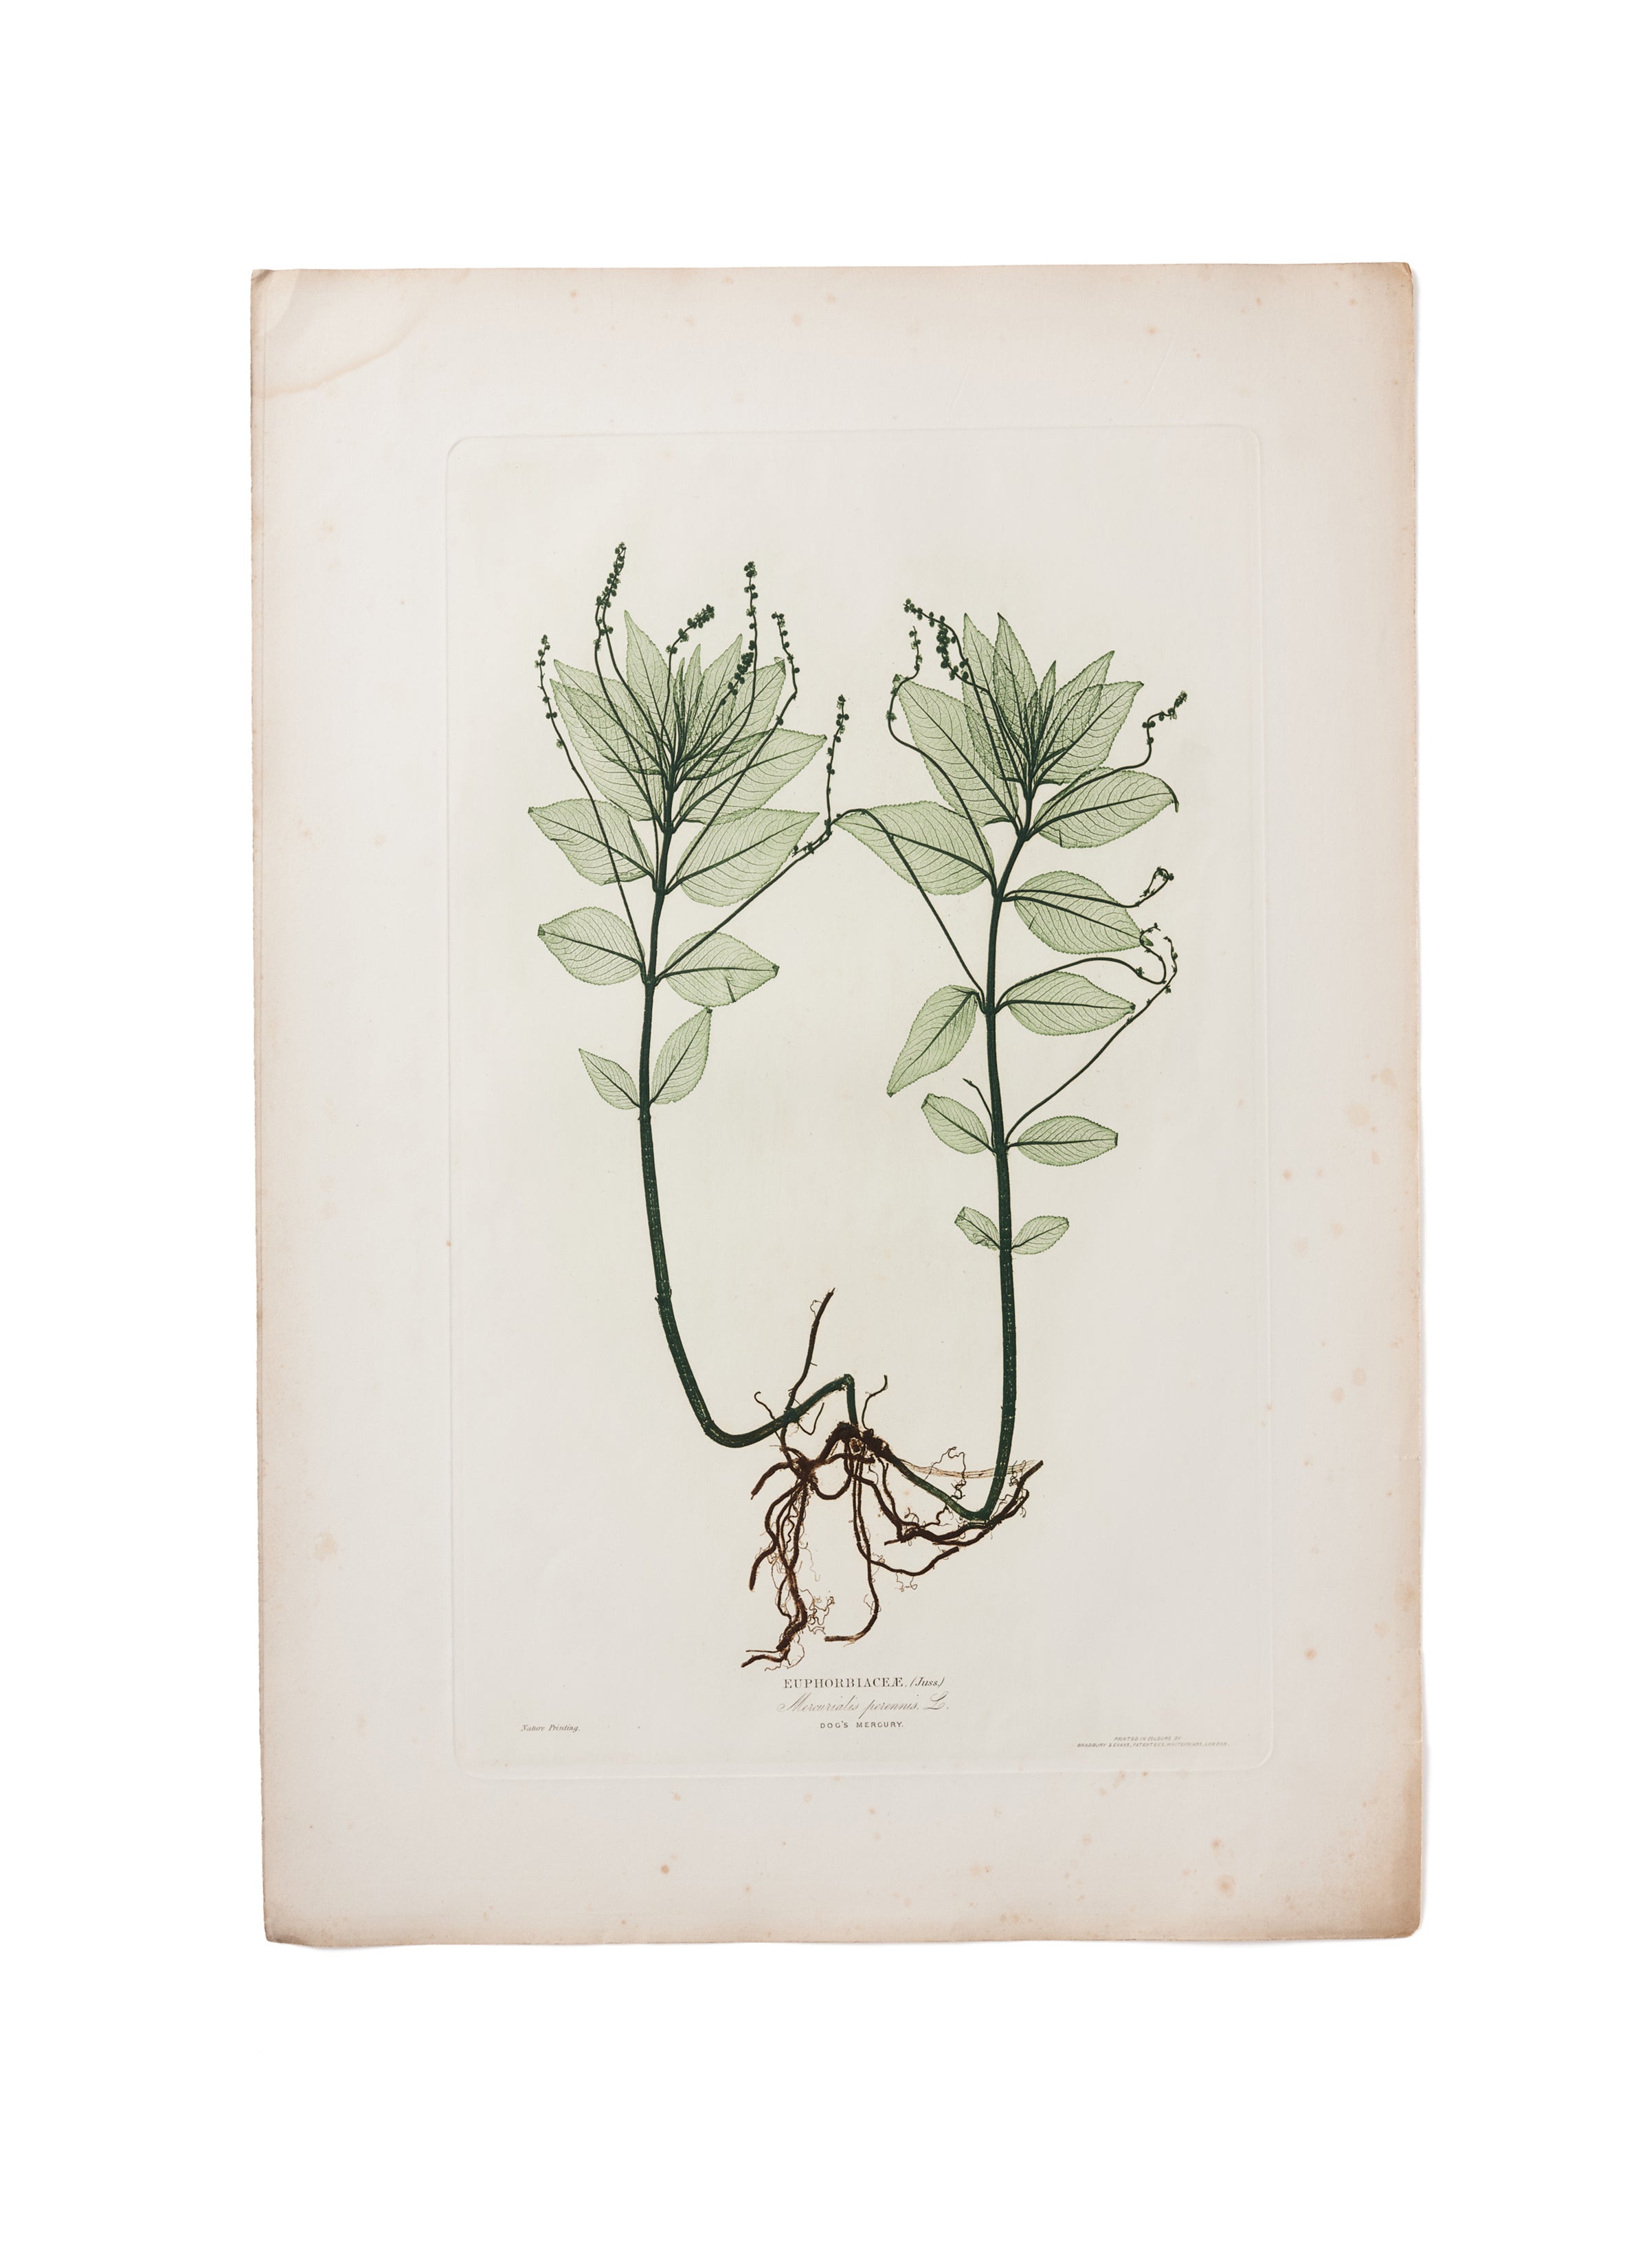 Dog's mercury (Mercurialis perennis): flowering plant with roots. Colour nature print by H. Bradbury.